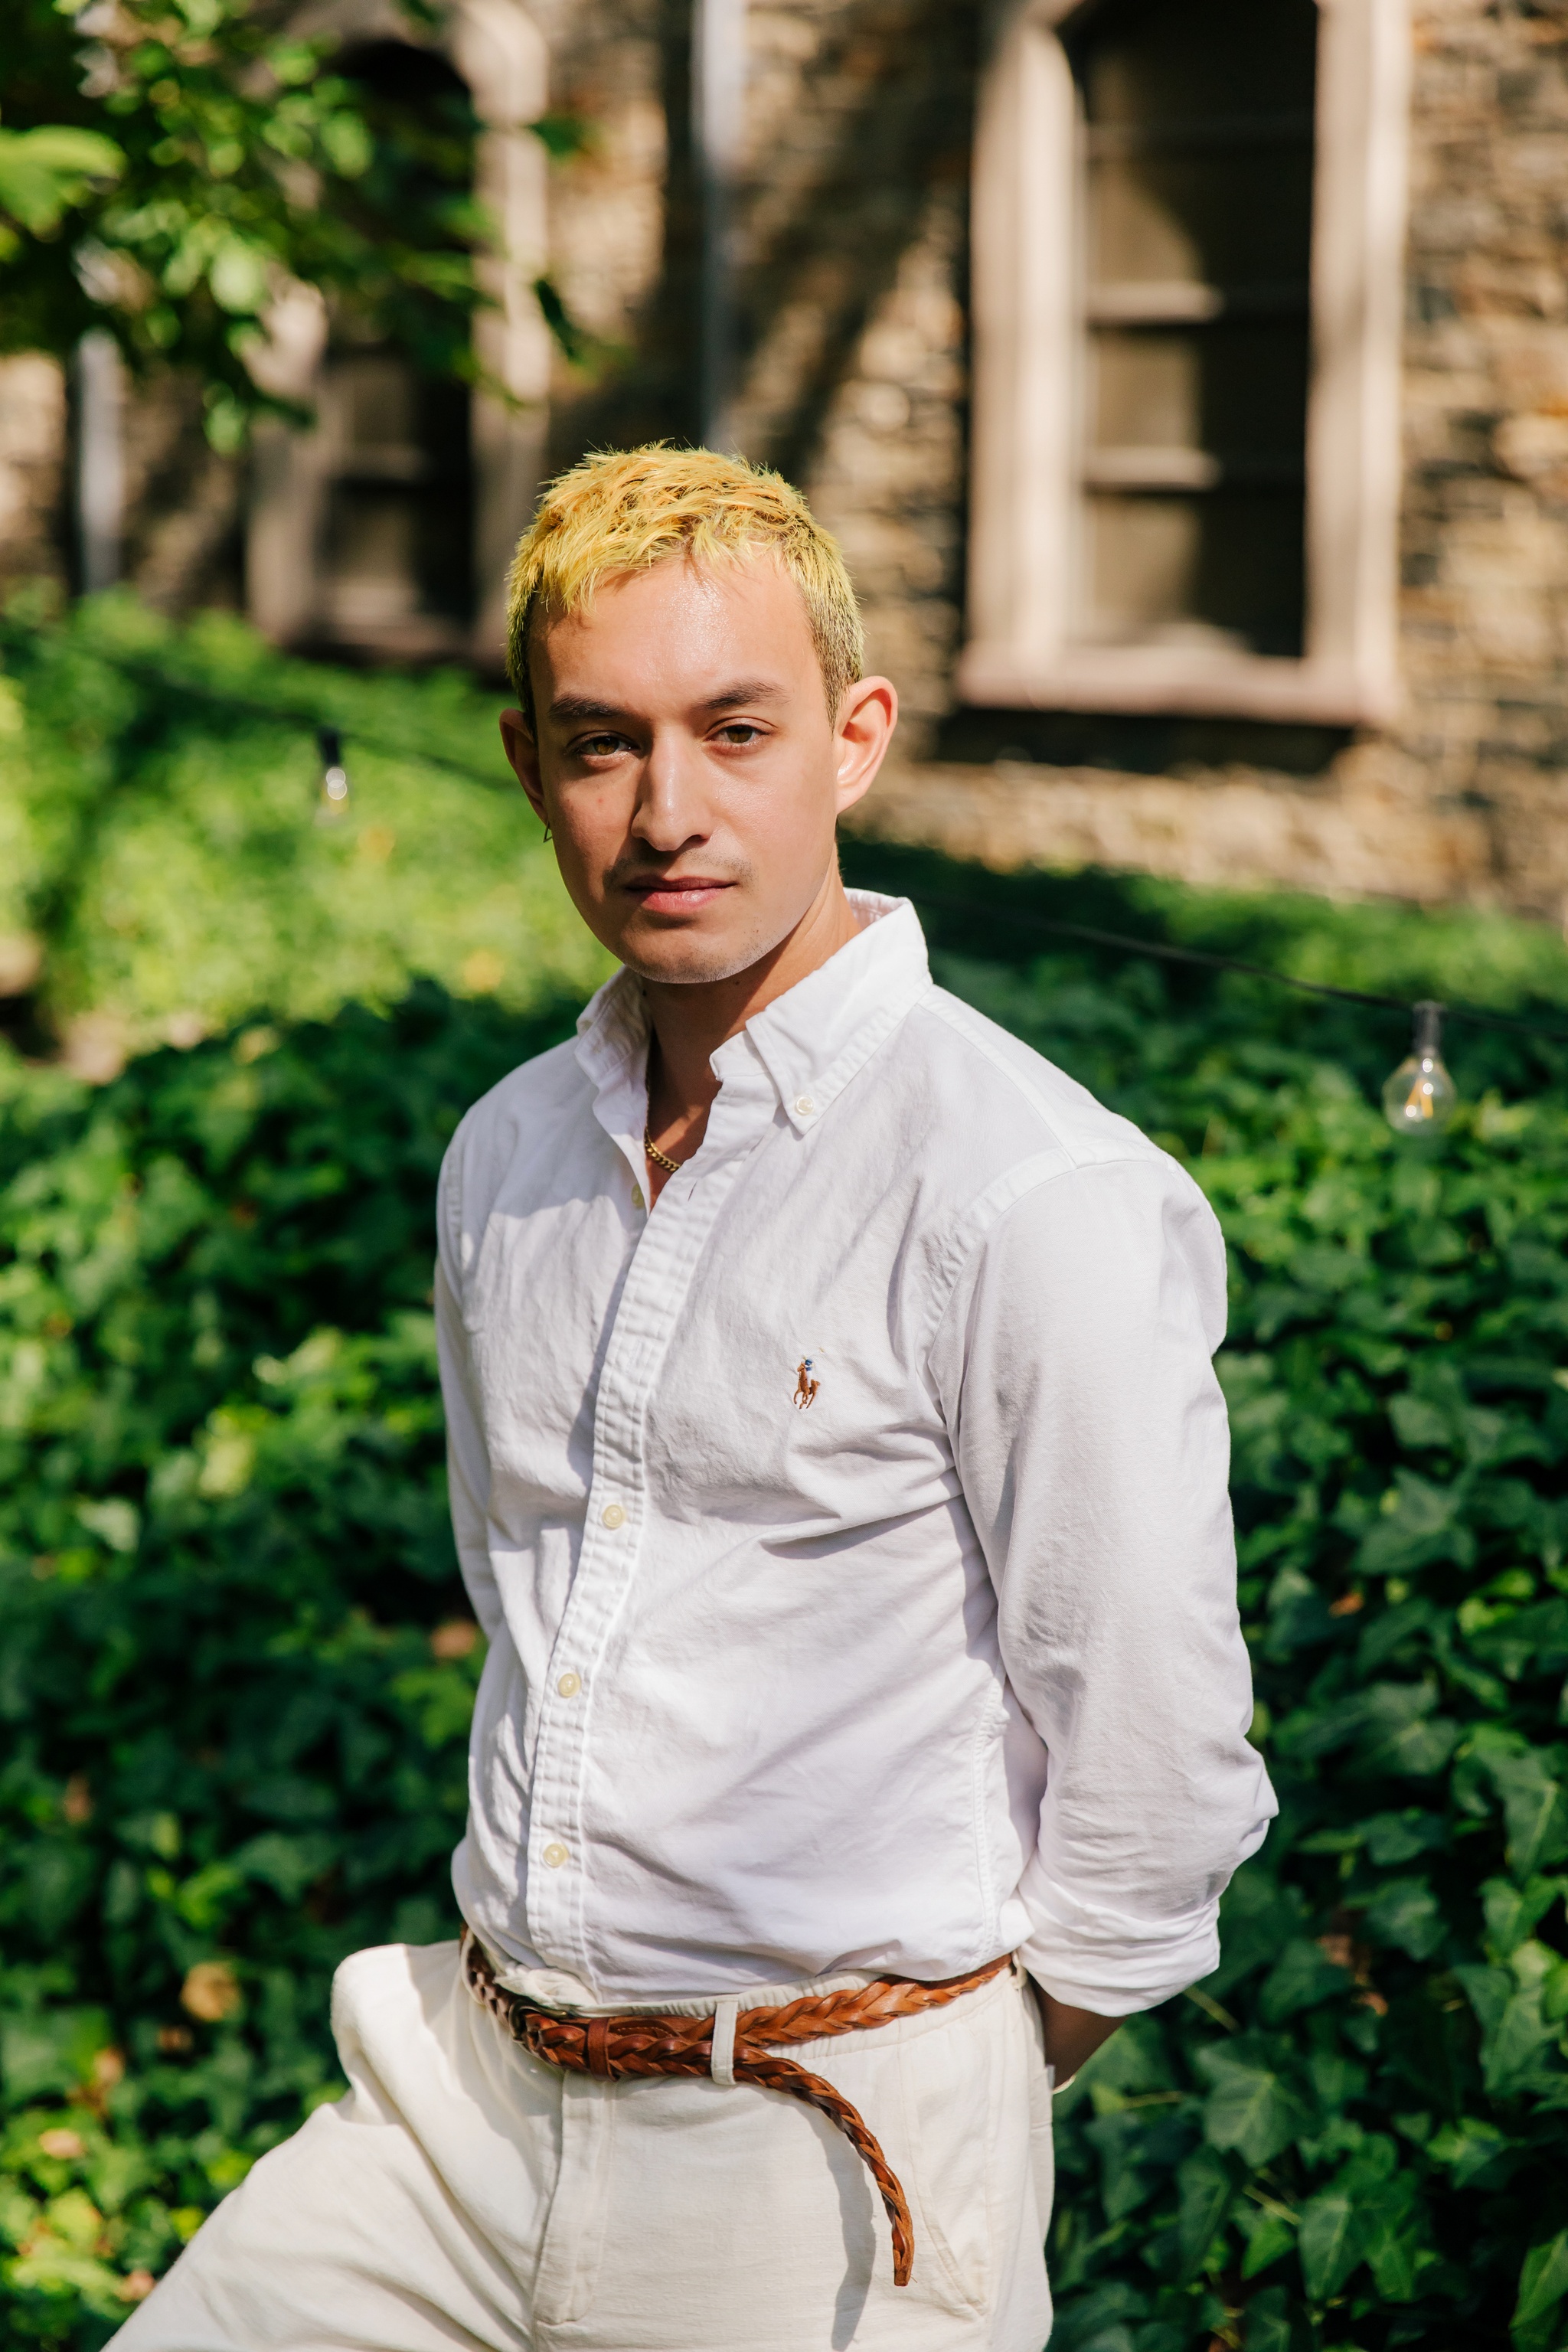 A portrait of Kyle Dacuyan. He stands outside in a garden area with green bushes behind him and a stone building in the background. He poses with his hands behind his back. He wears a white button down shirt, white slacks, and has bleached blond hair. Photo by Tess Mayer